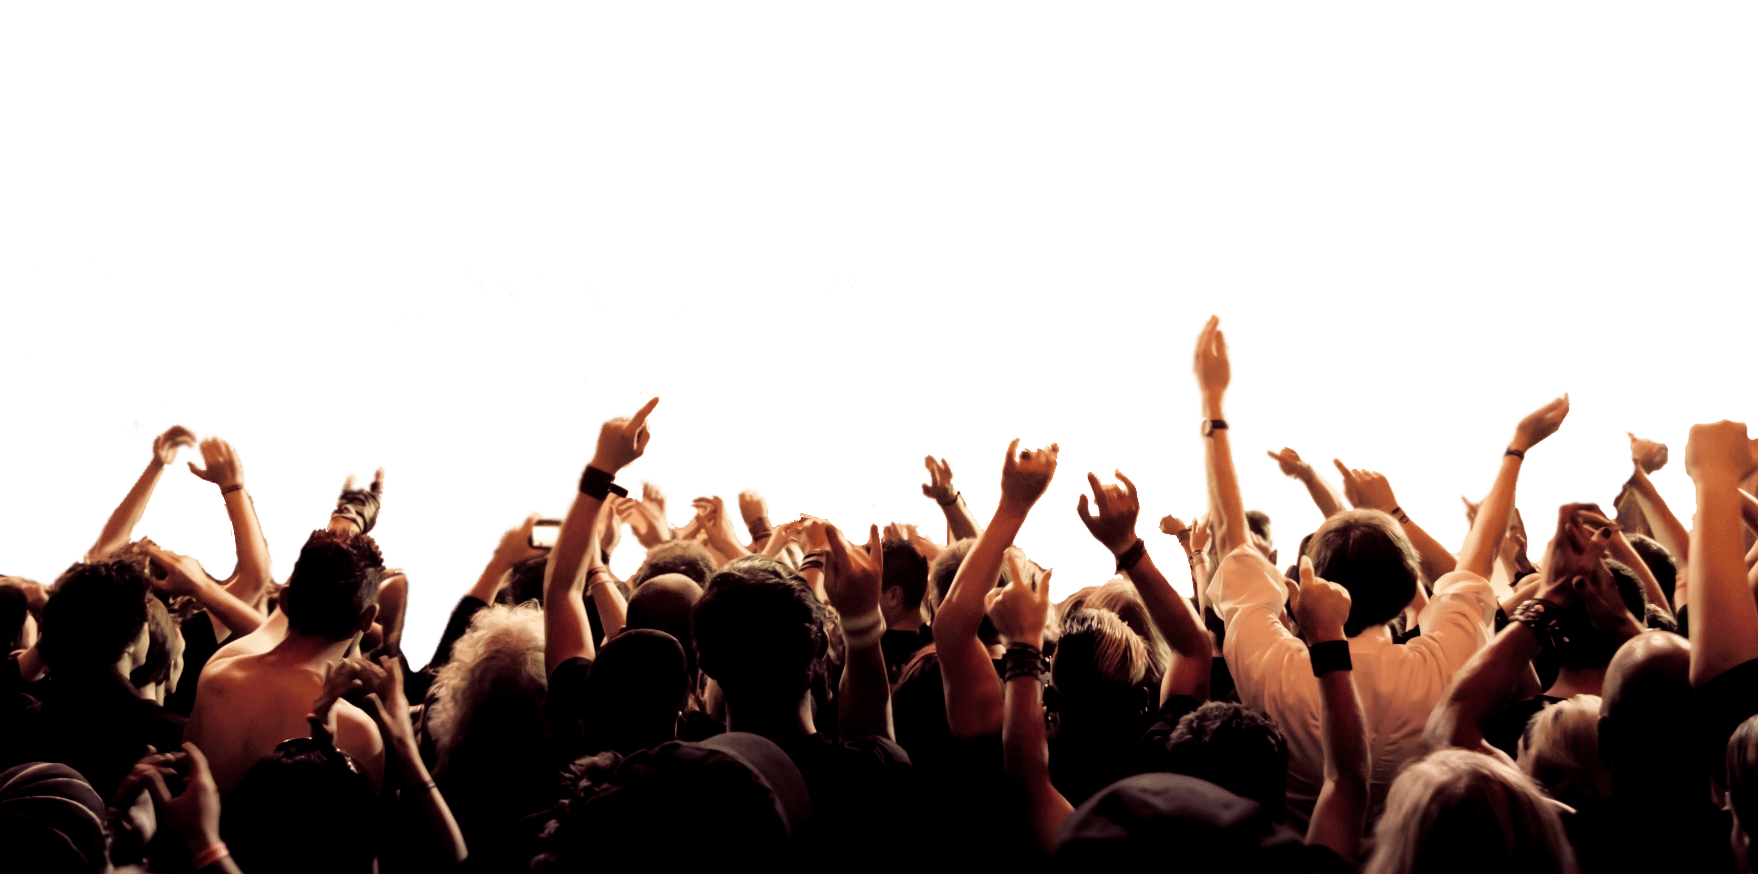 Crowd clapping mp3 free download